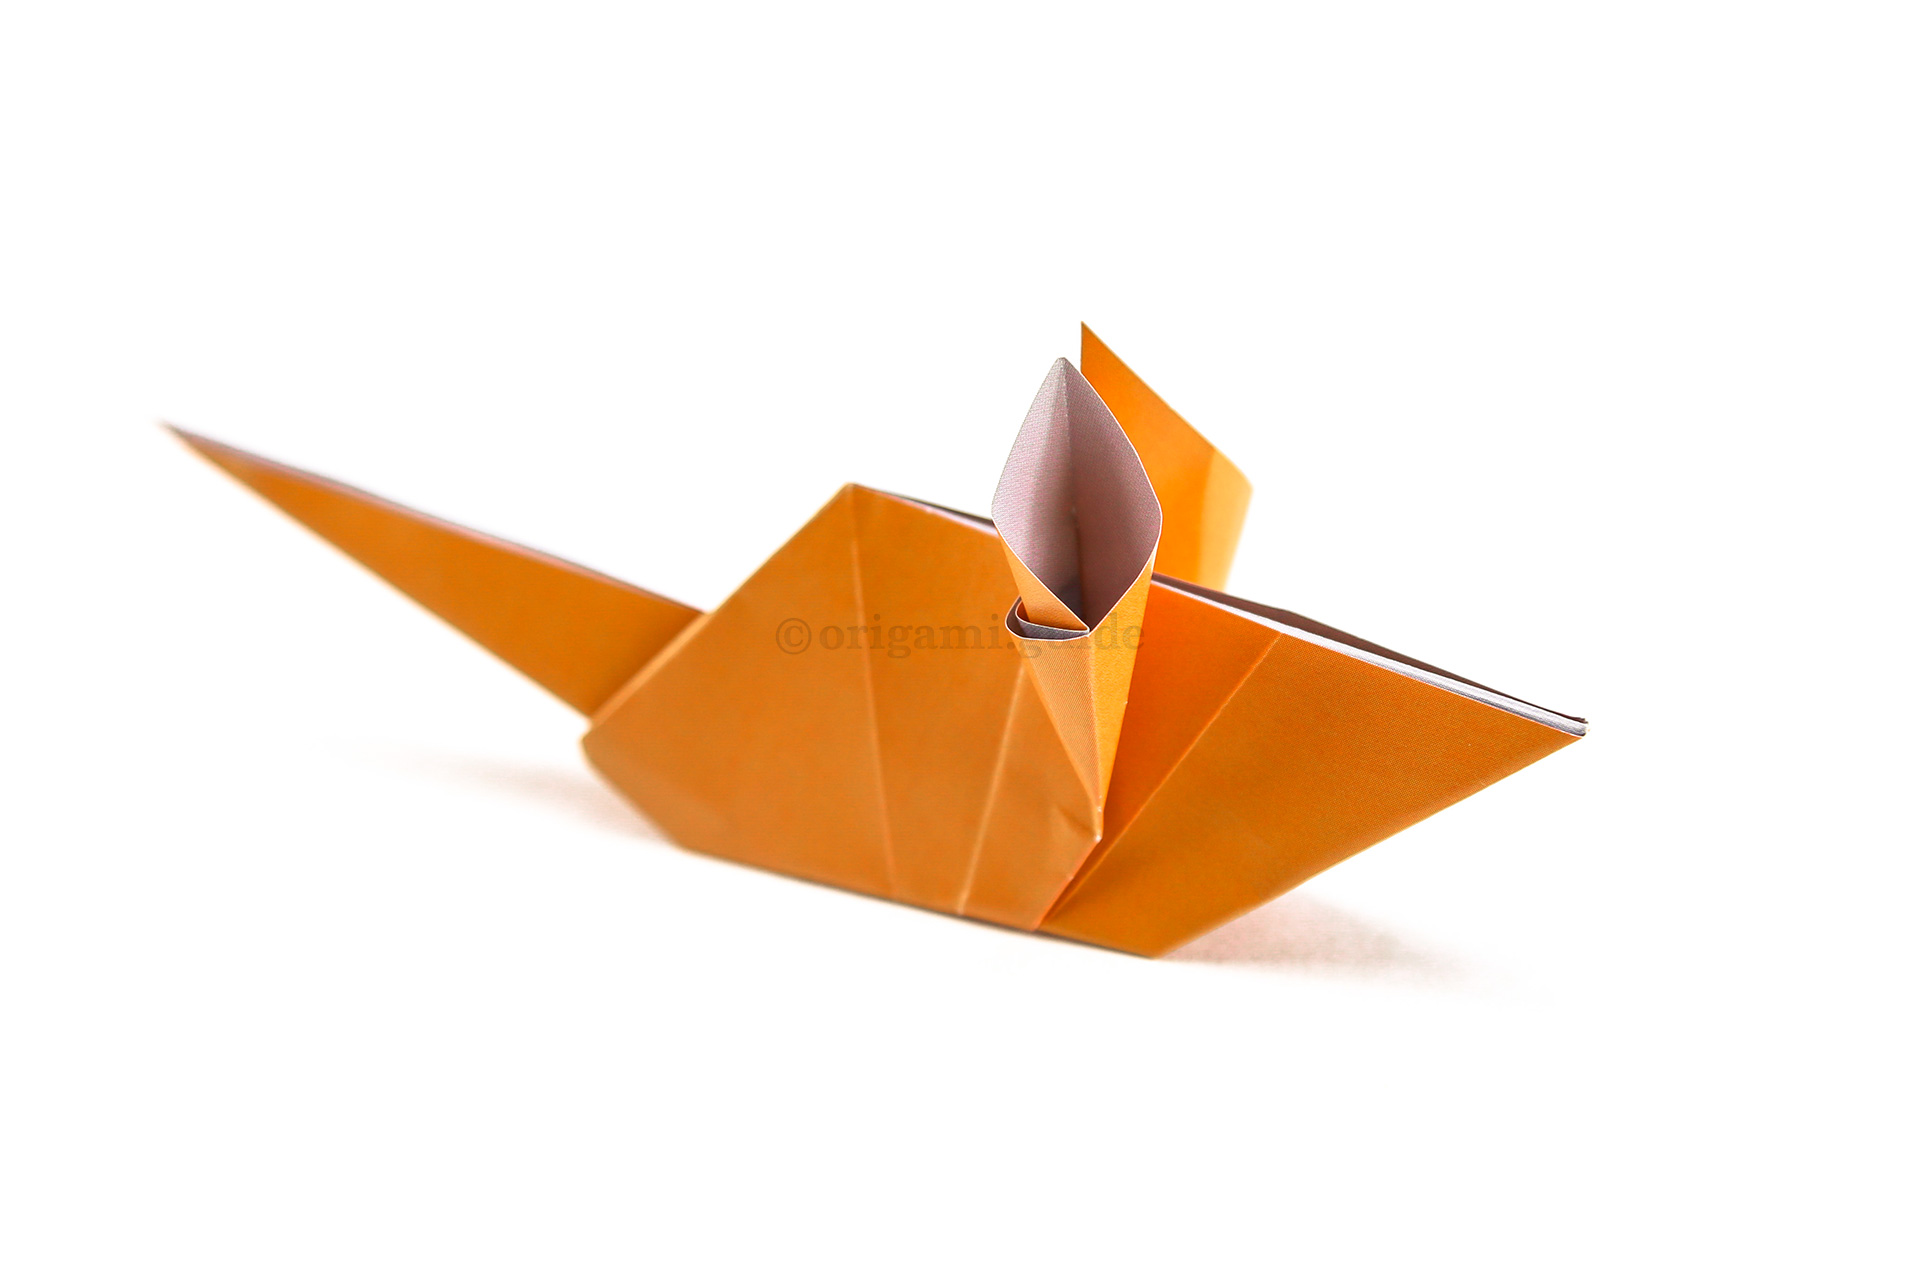 You can fold the lower section under to give your origami mouse different poses.